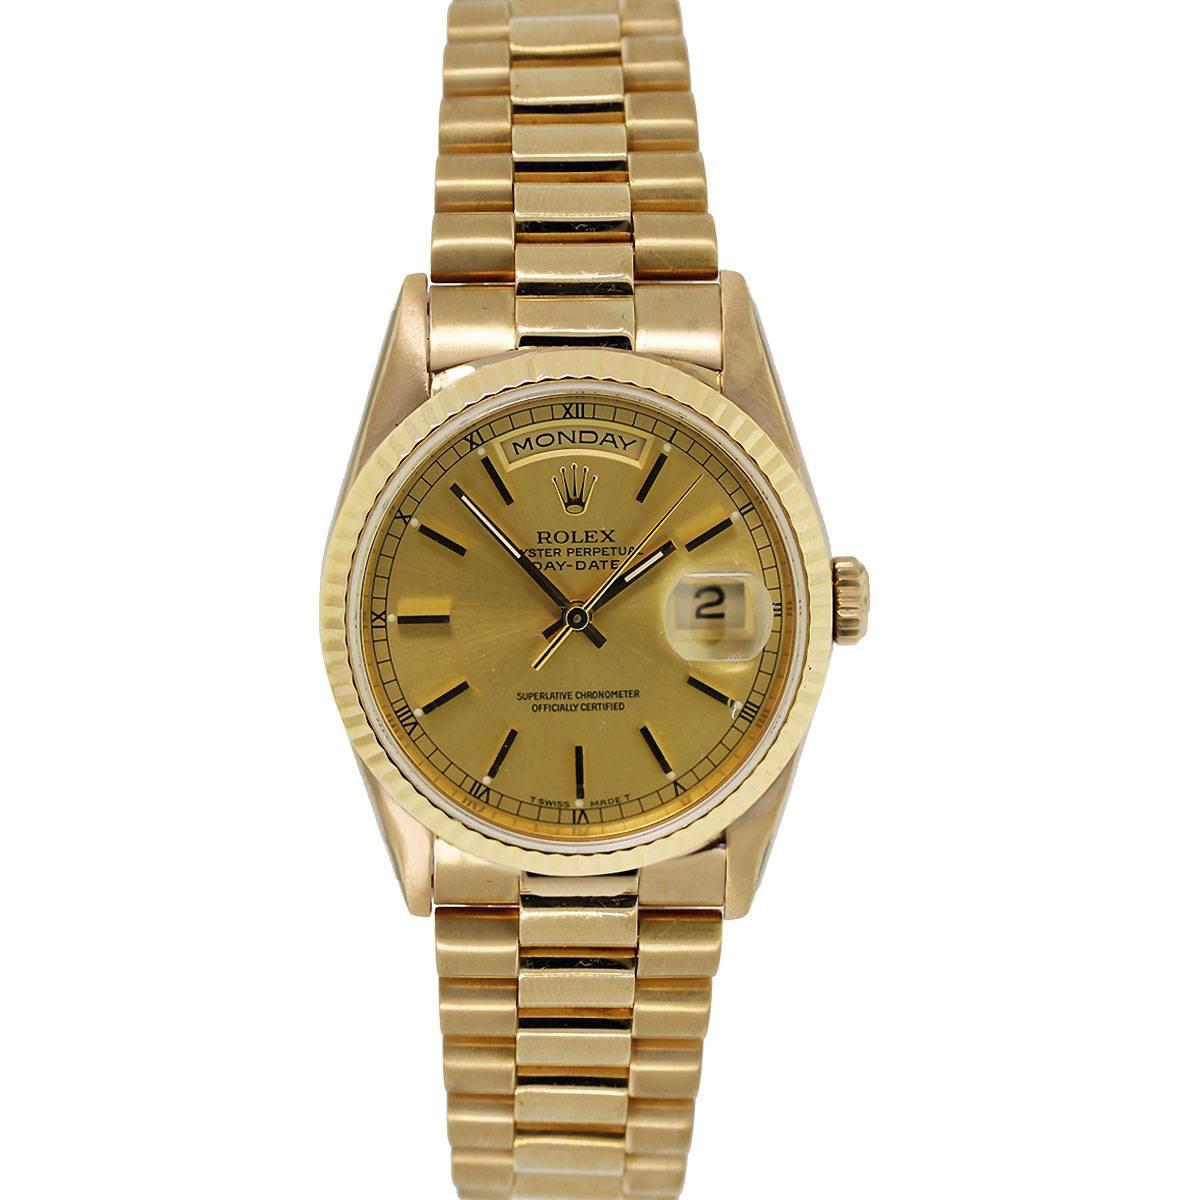 Brand: Rolex Presidential
Model: Day-Date
MPN: 18238
Serial Number: 